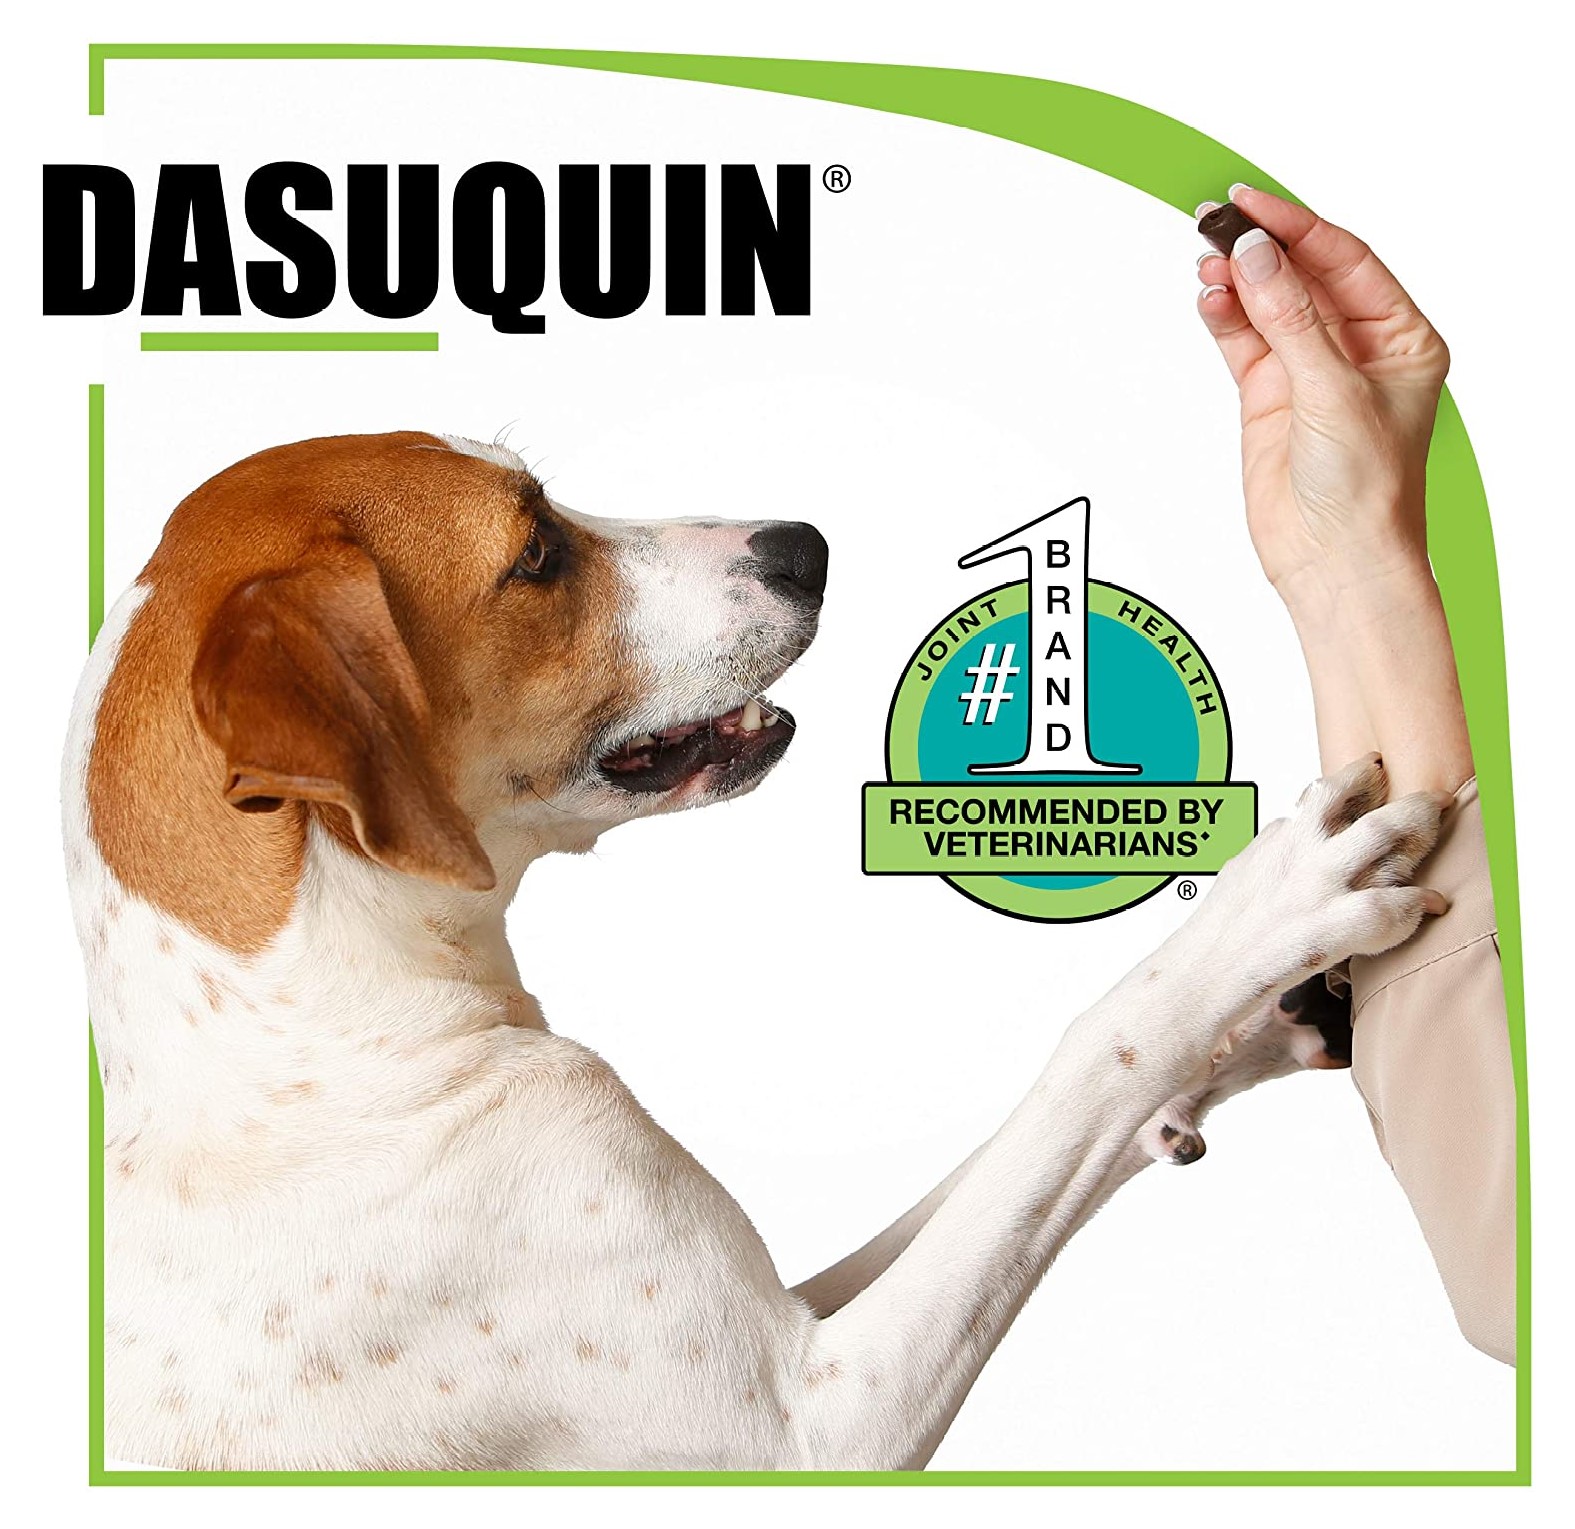 dasuquin-advanced-esm-soft-chews-for-dogs-by-nutramax-1family-1health